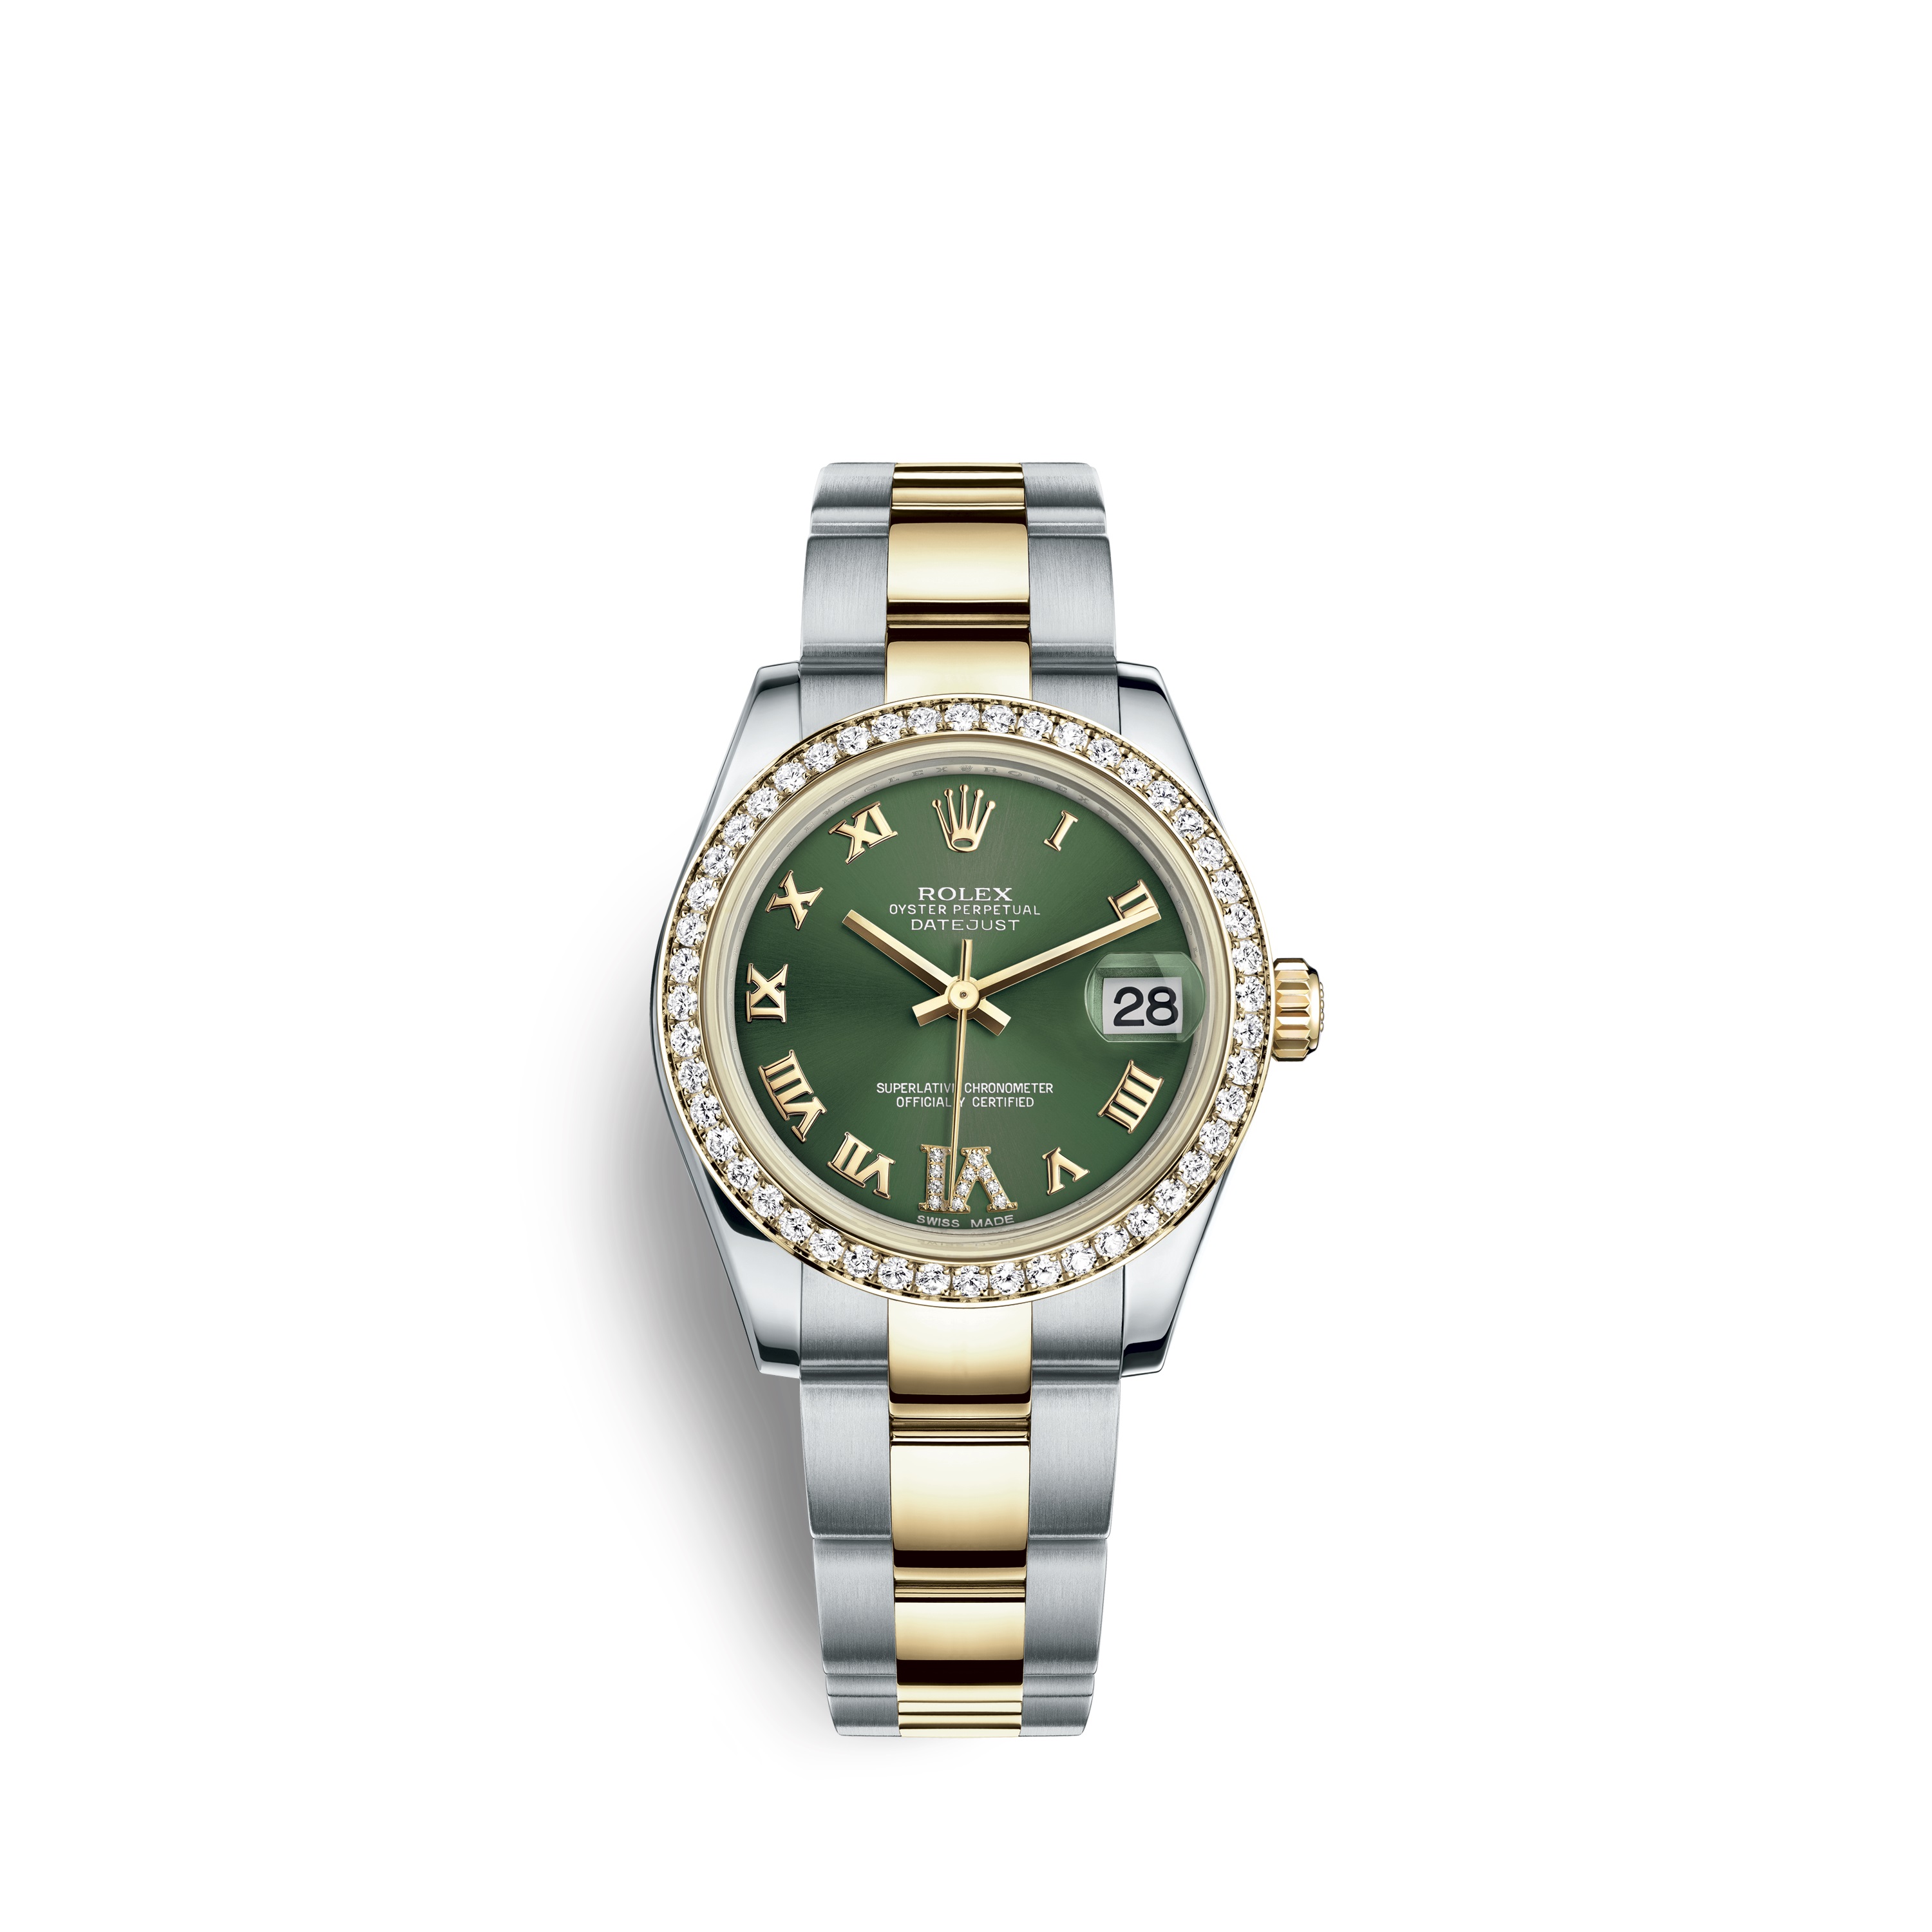 Datejust 31 178383 Gold and Stainless Steel Watch (Olive Green Set with Diamonds) - Click Image to Close